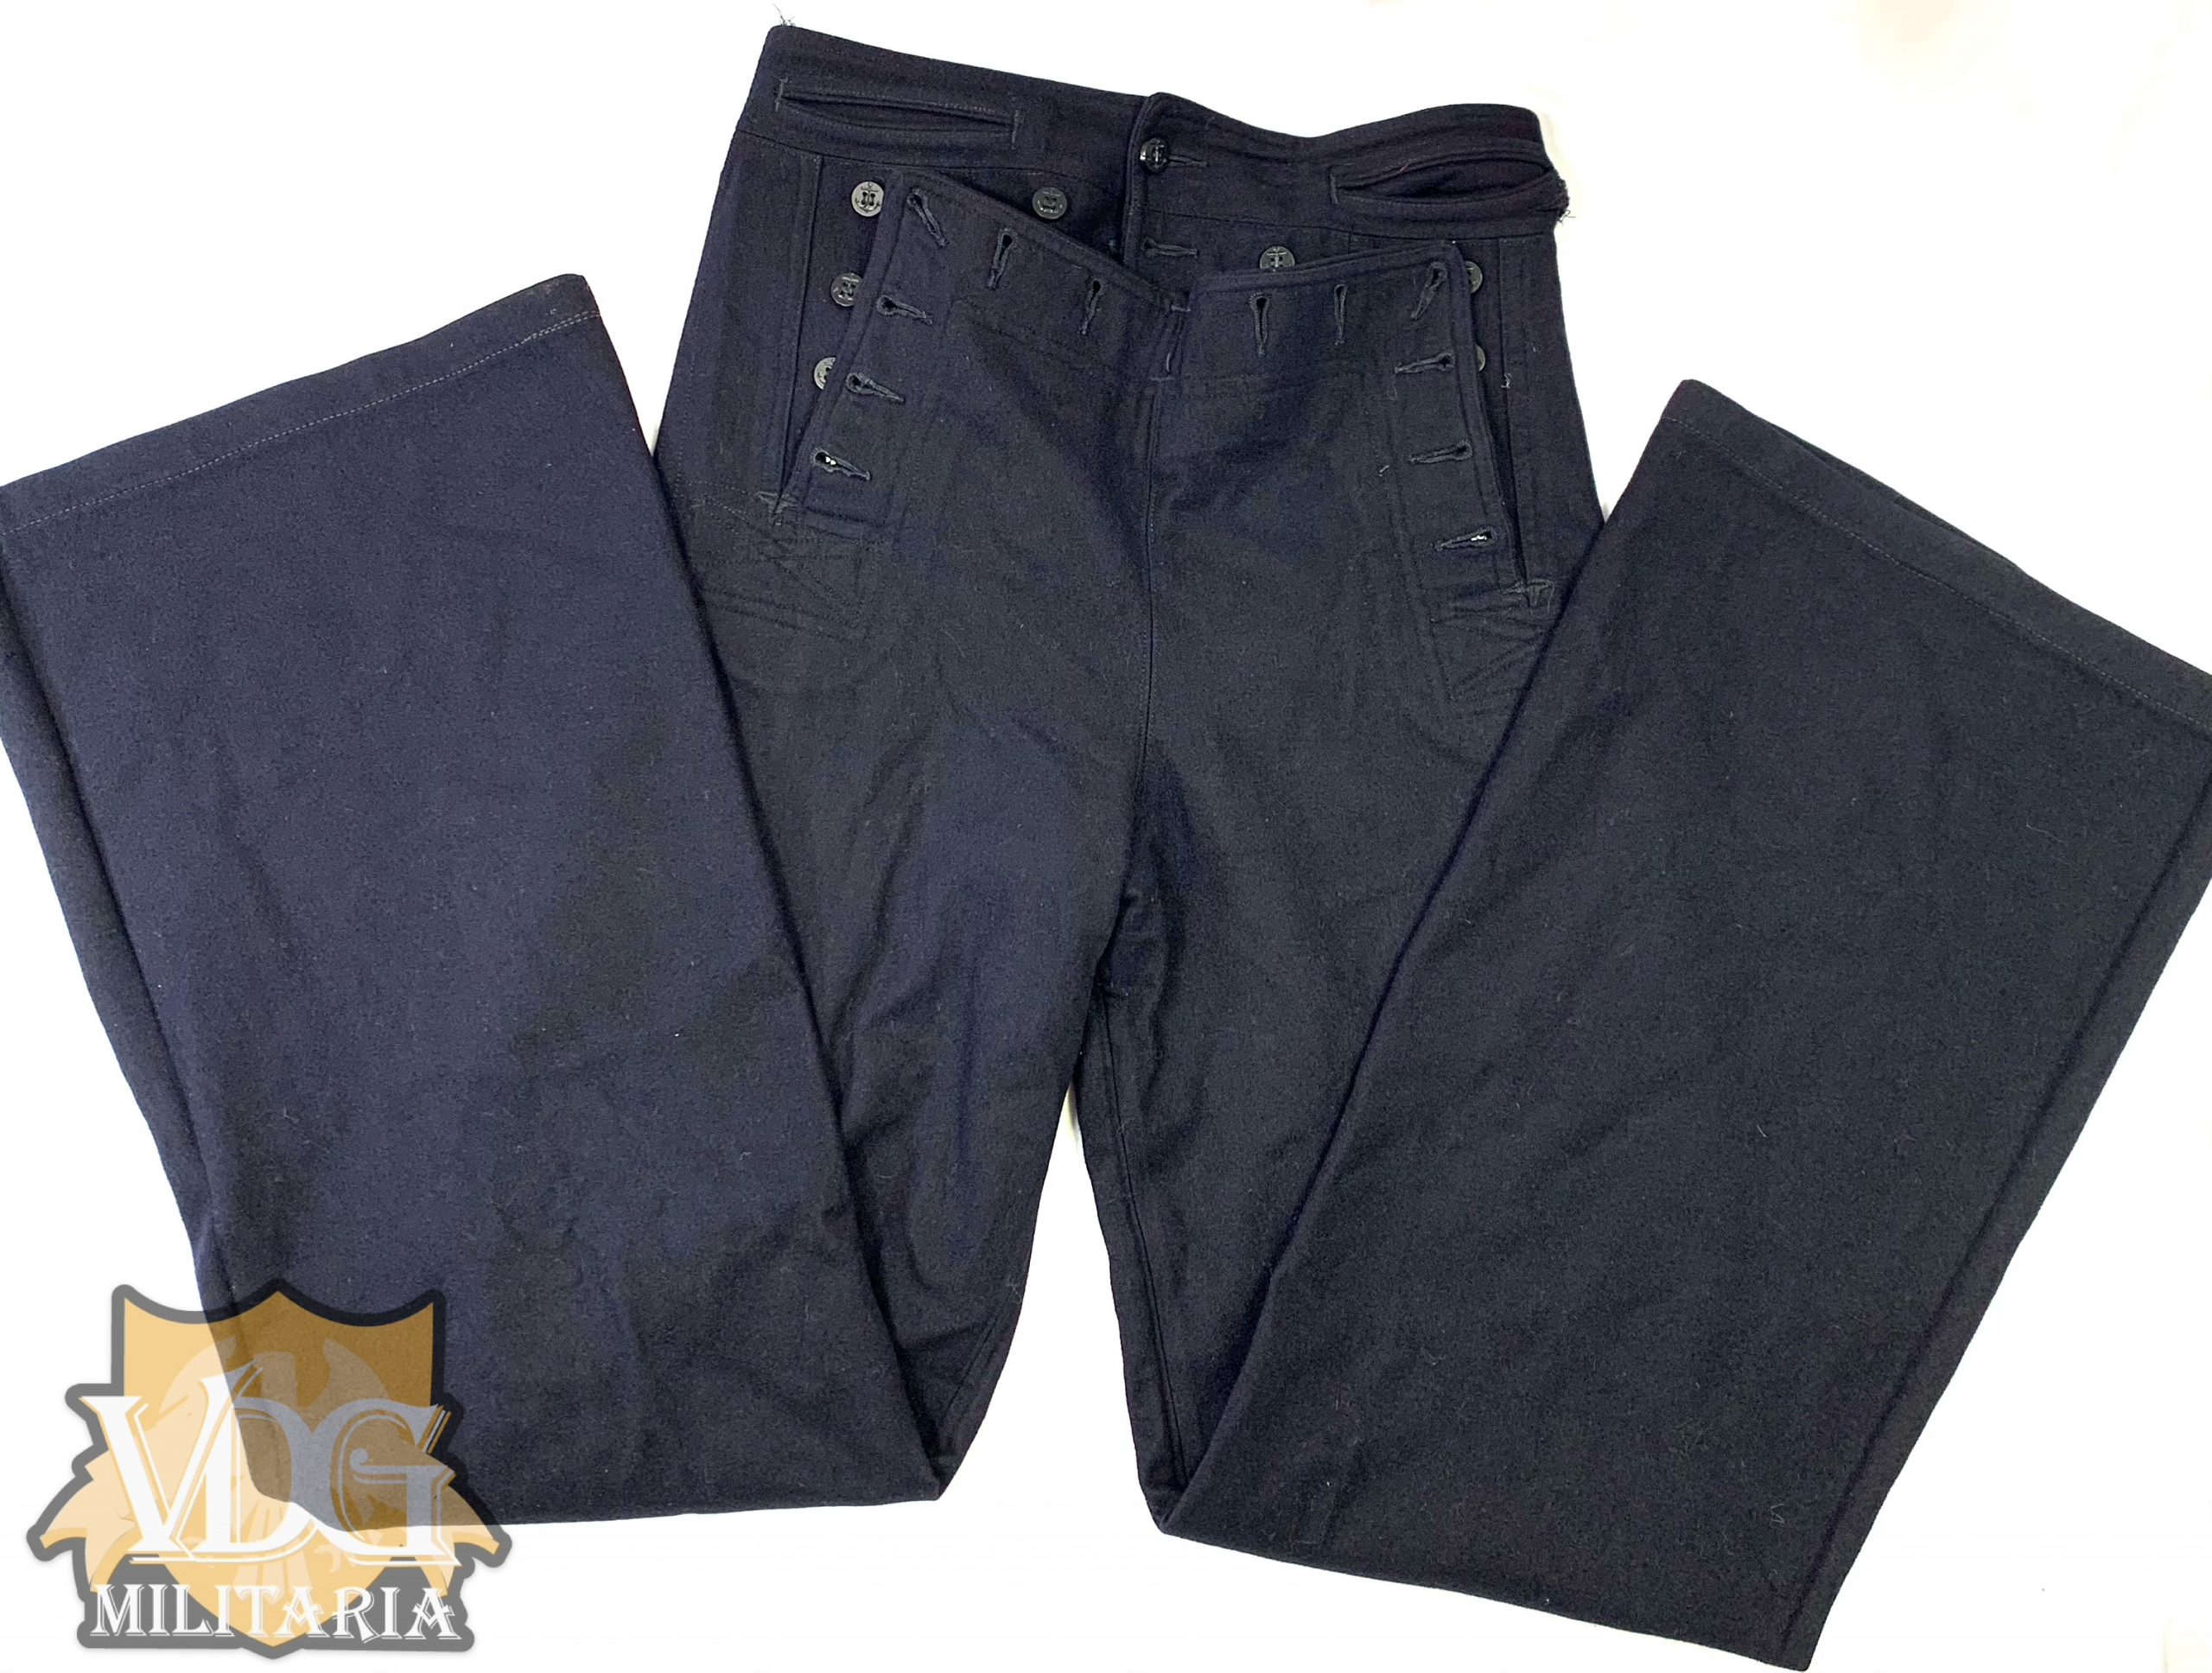 US Navy Blue Drop Front Trousers-Embroidered Stitching | VDG Militaria